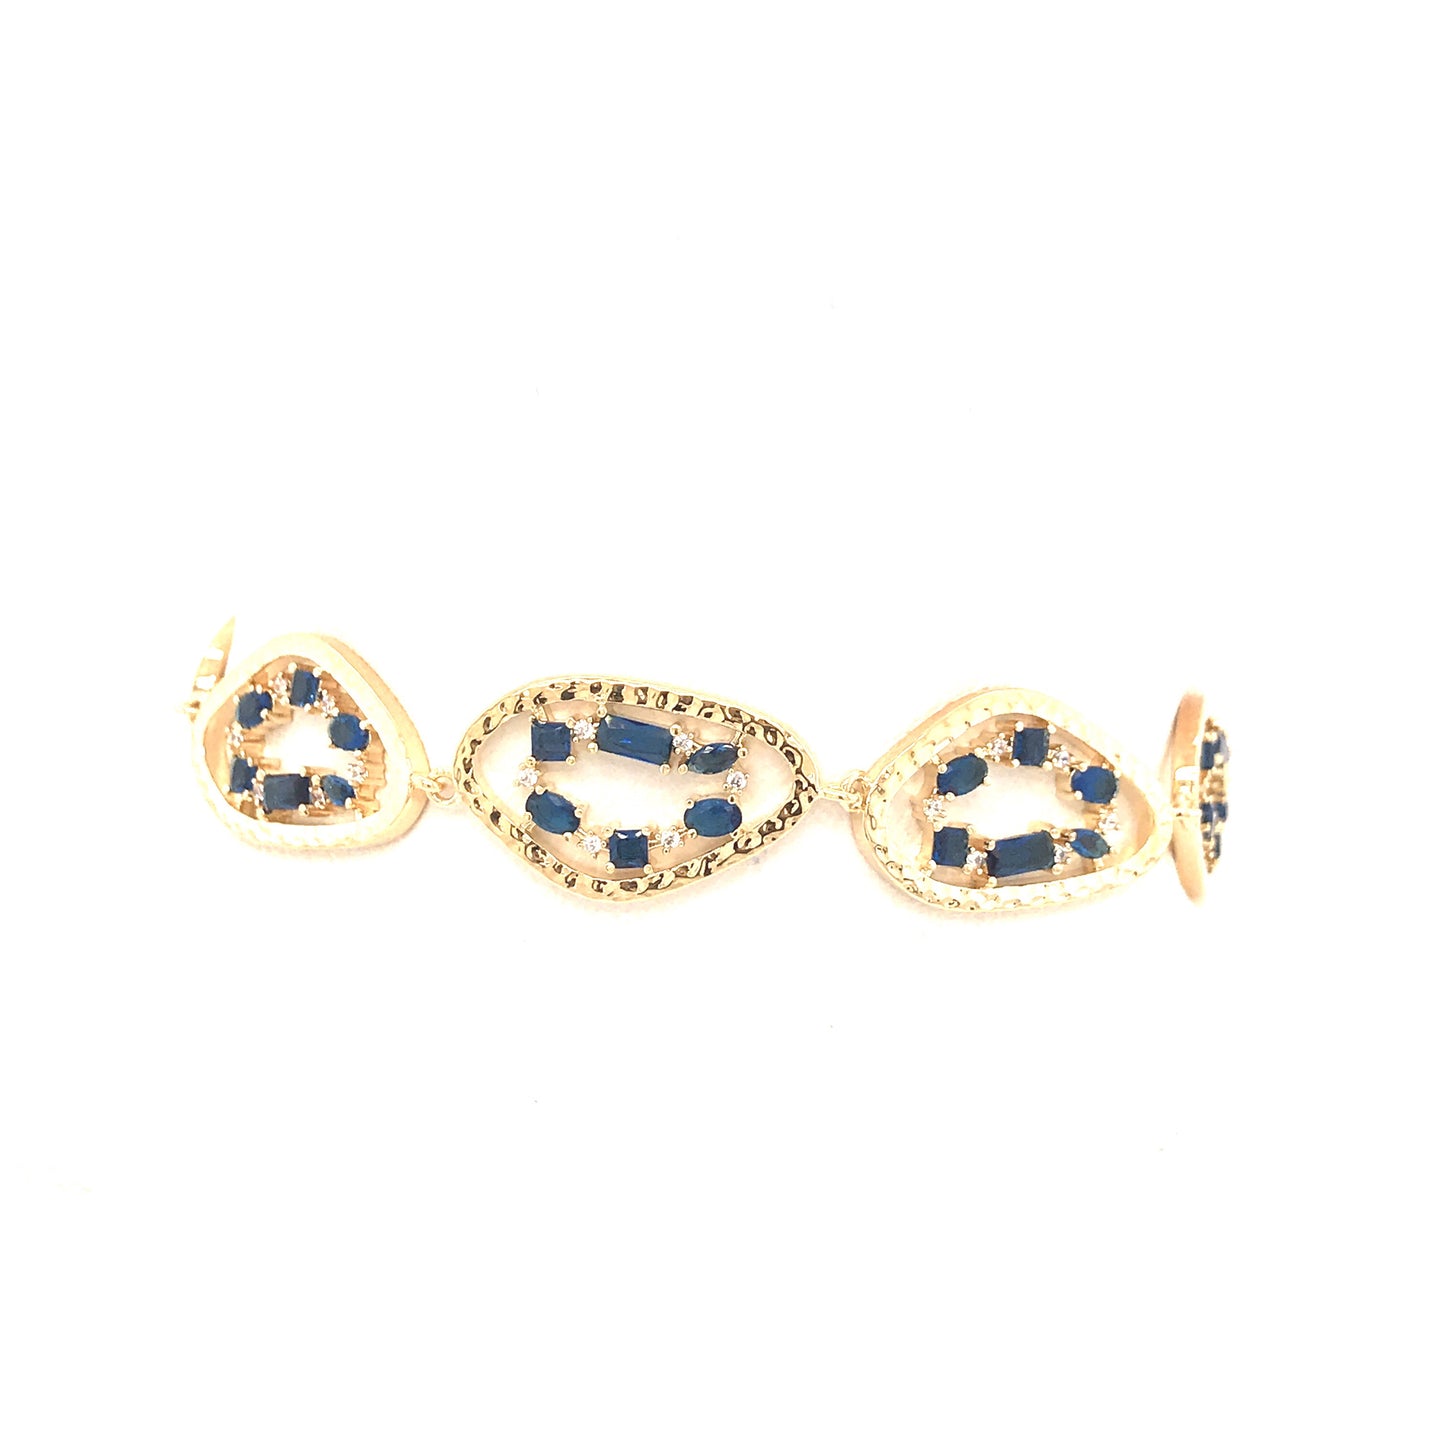 Gold Plated Curvy Oblong Bracelet With Blue Stones - HK Jewels